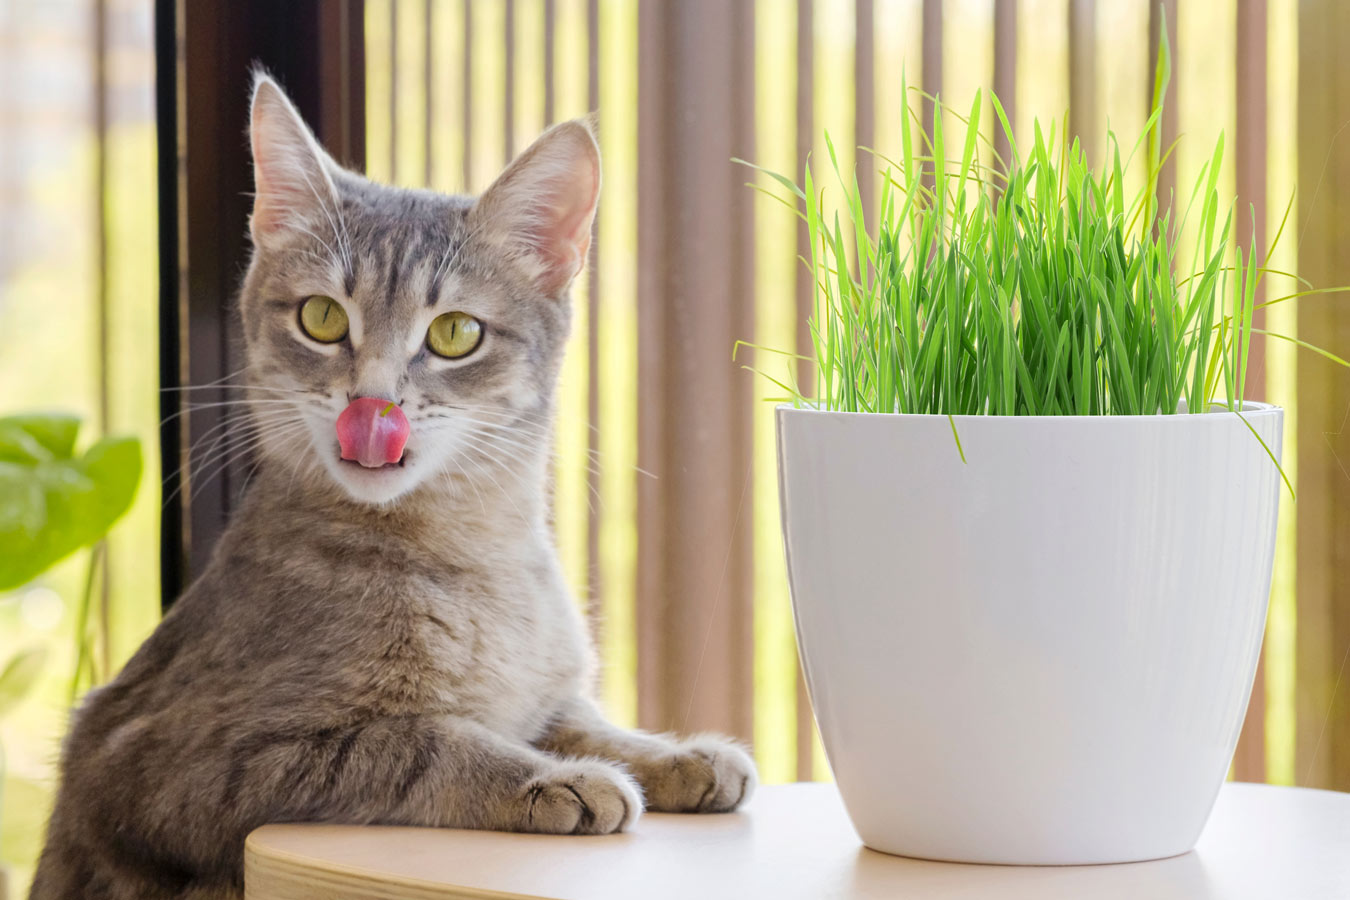 Cat licking her chops with cat grass in front of her on a table